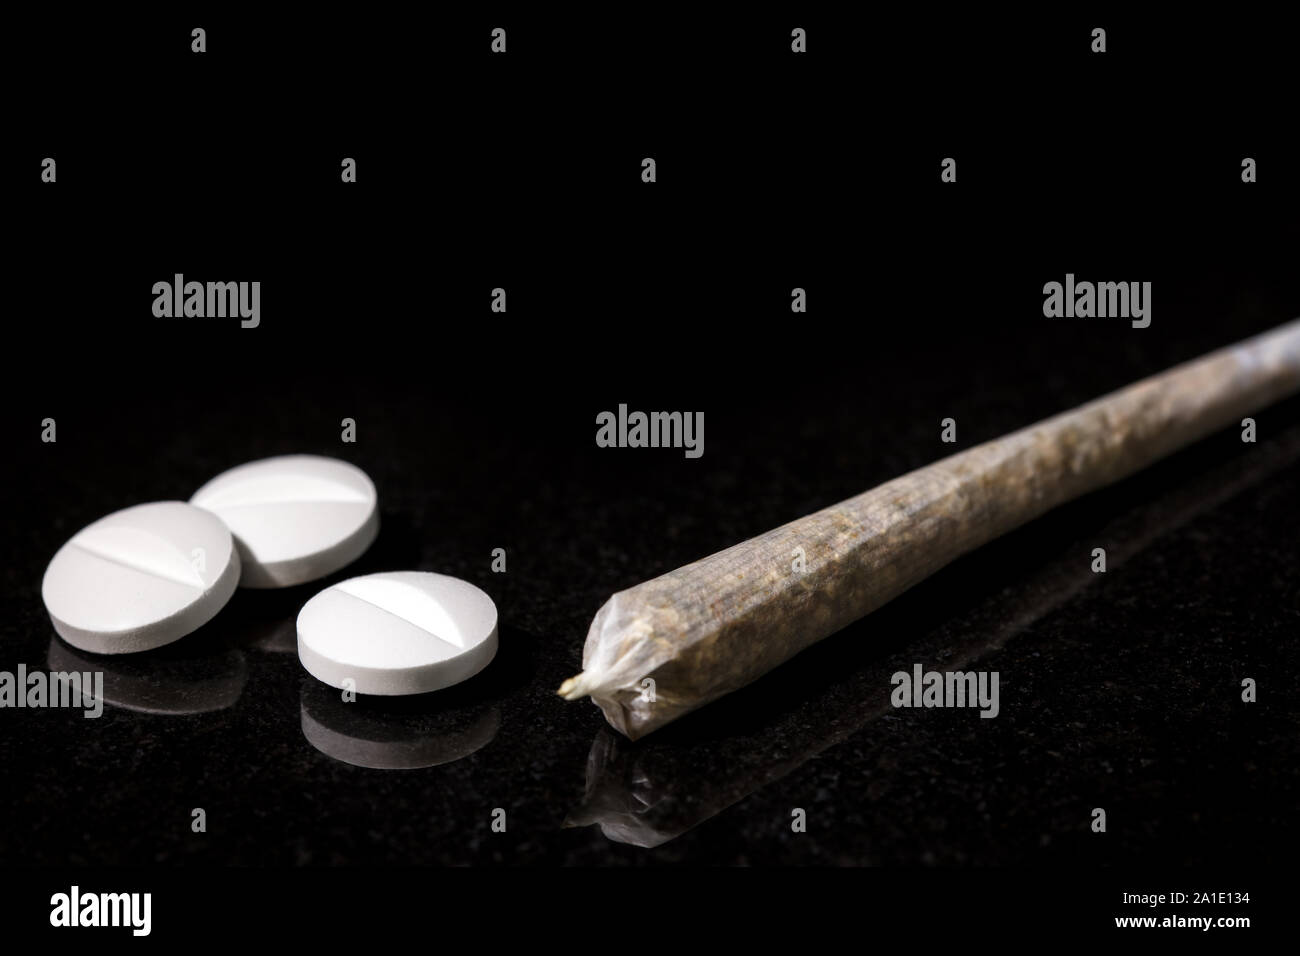 Cannabis Joint with white Pills, concept medicine and pharmacy, black background Stock Photo